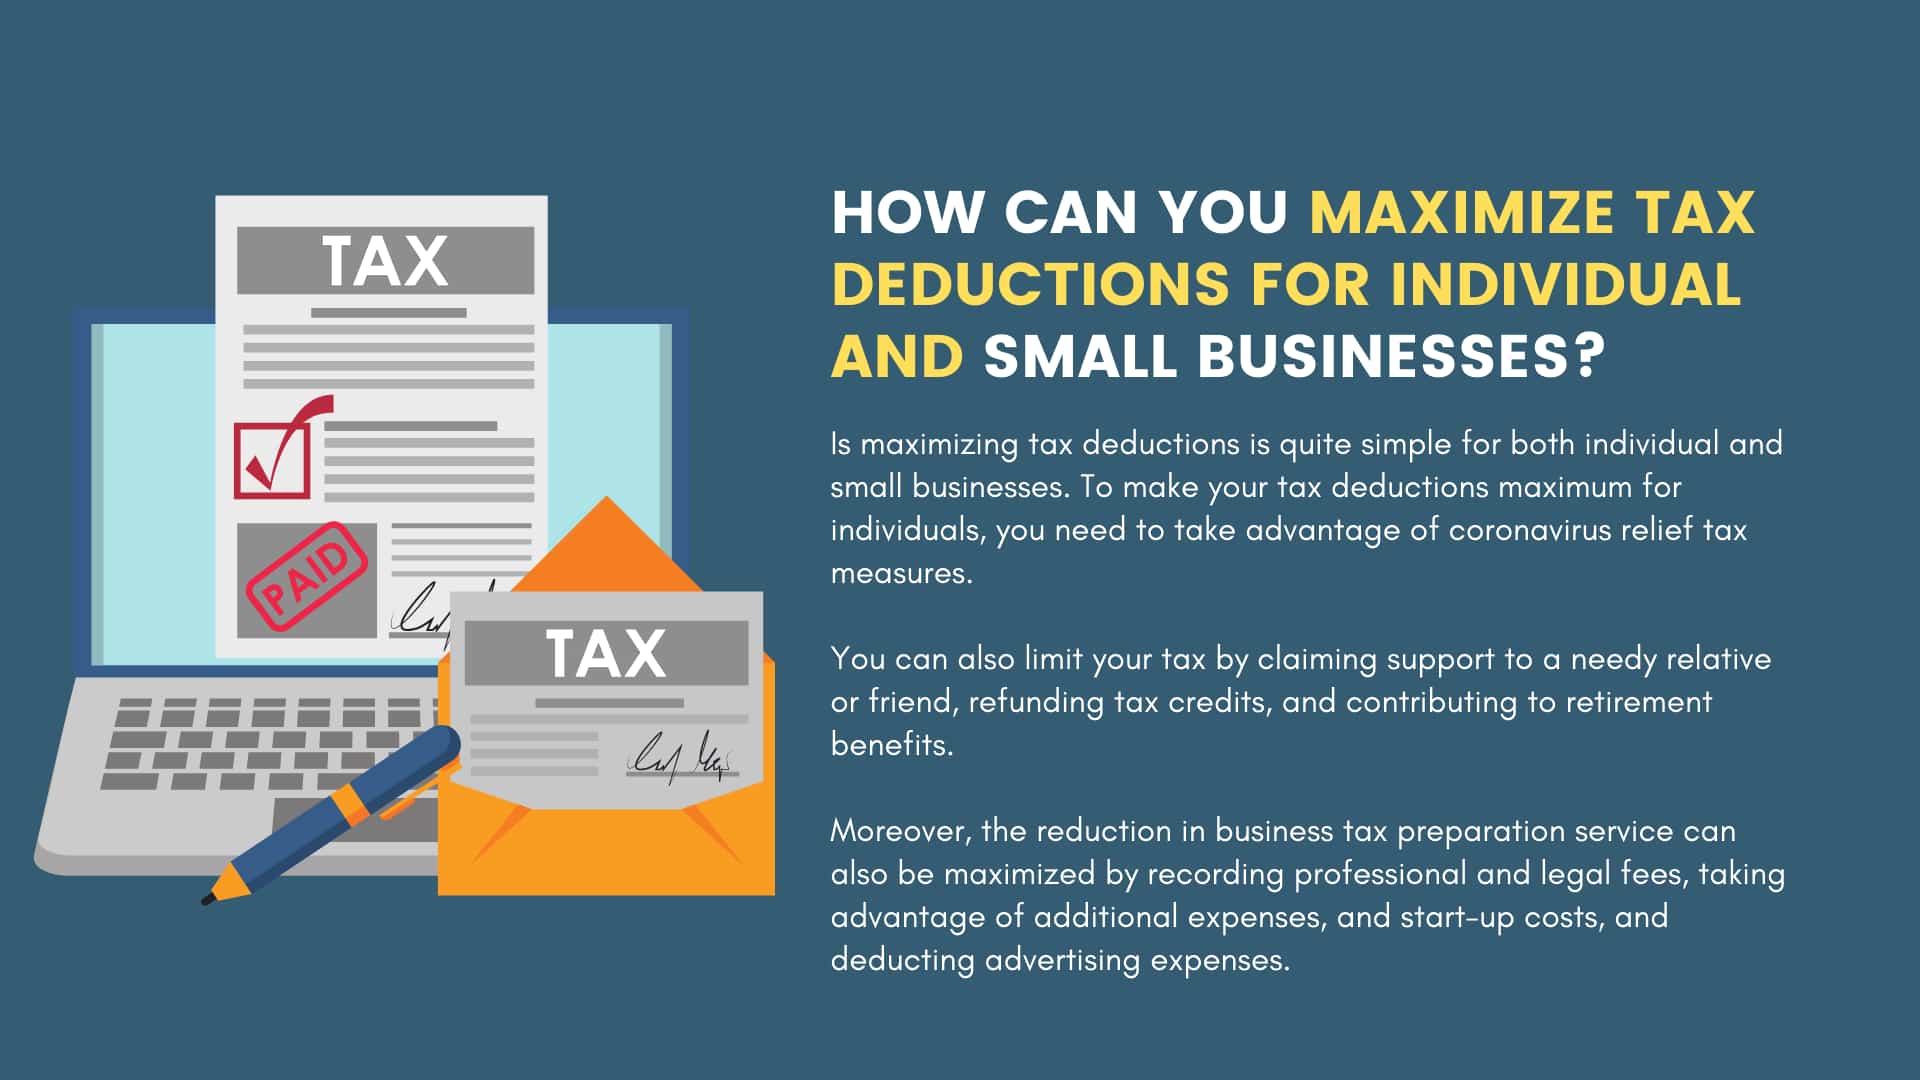 How Can You Maximize Tax Deductions For Individual and Small Businesses